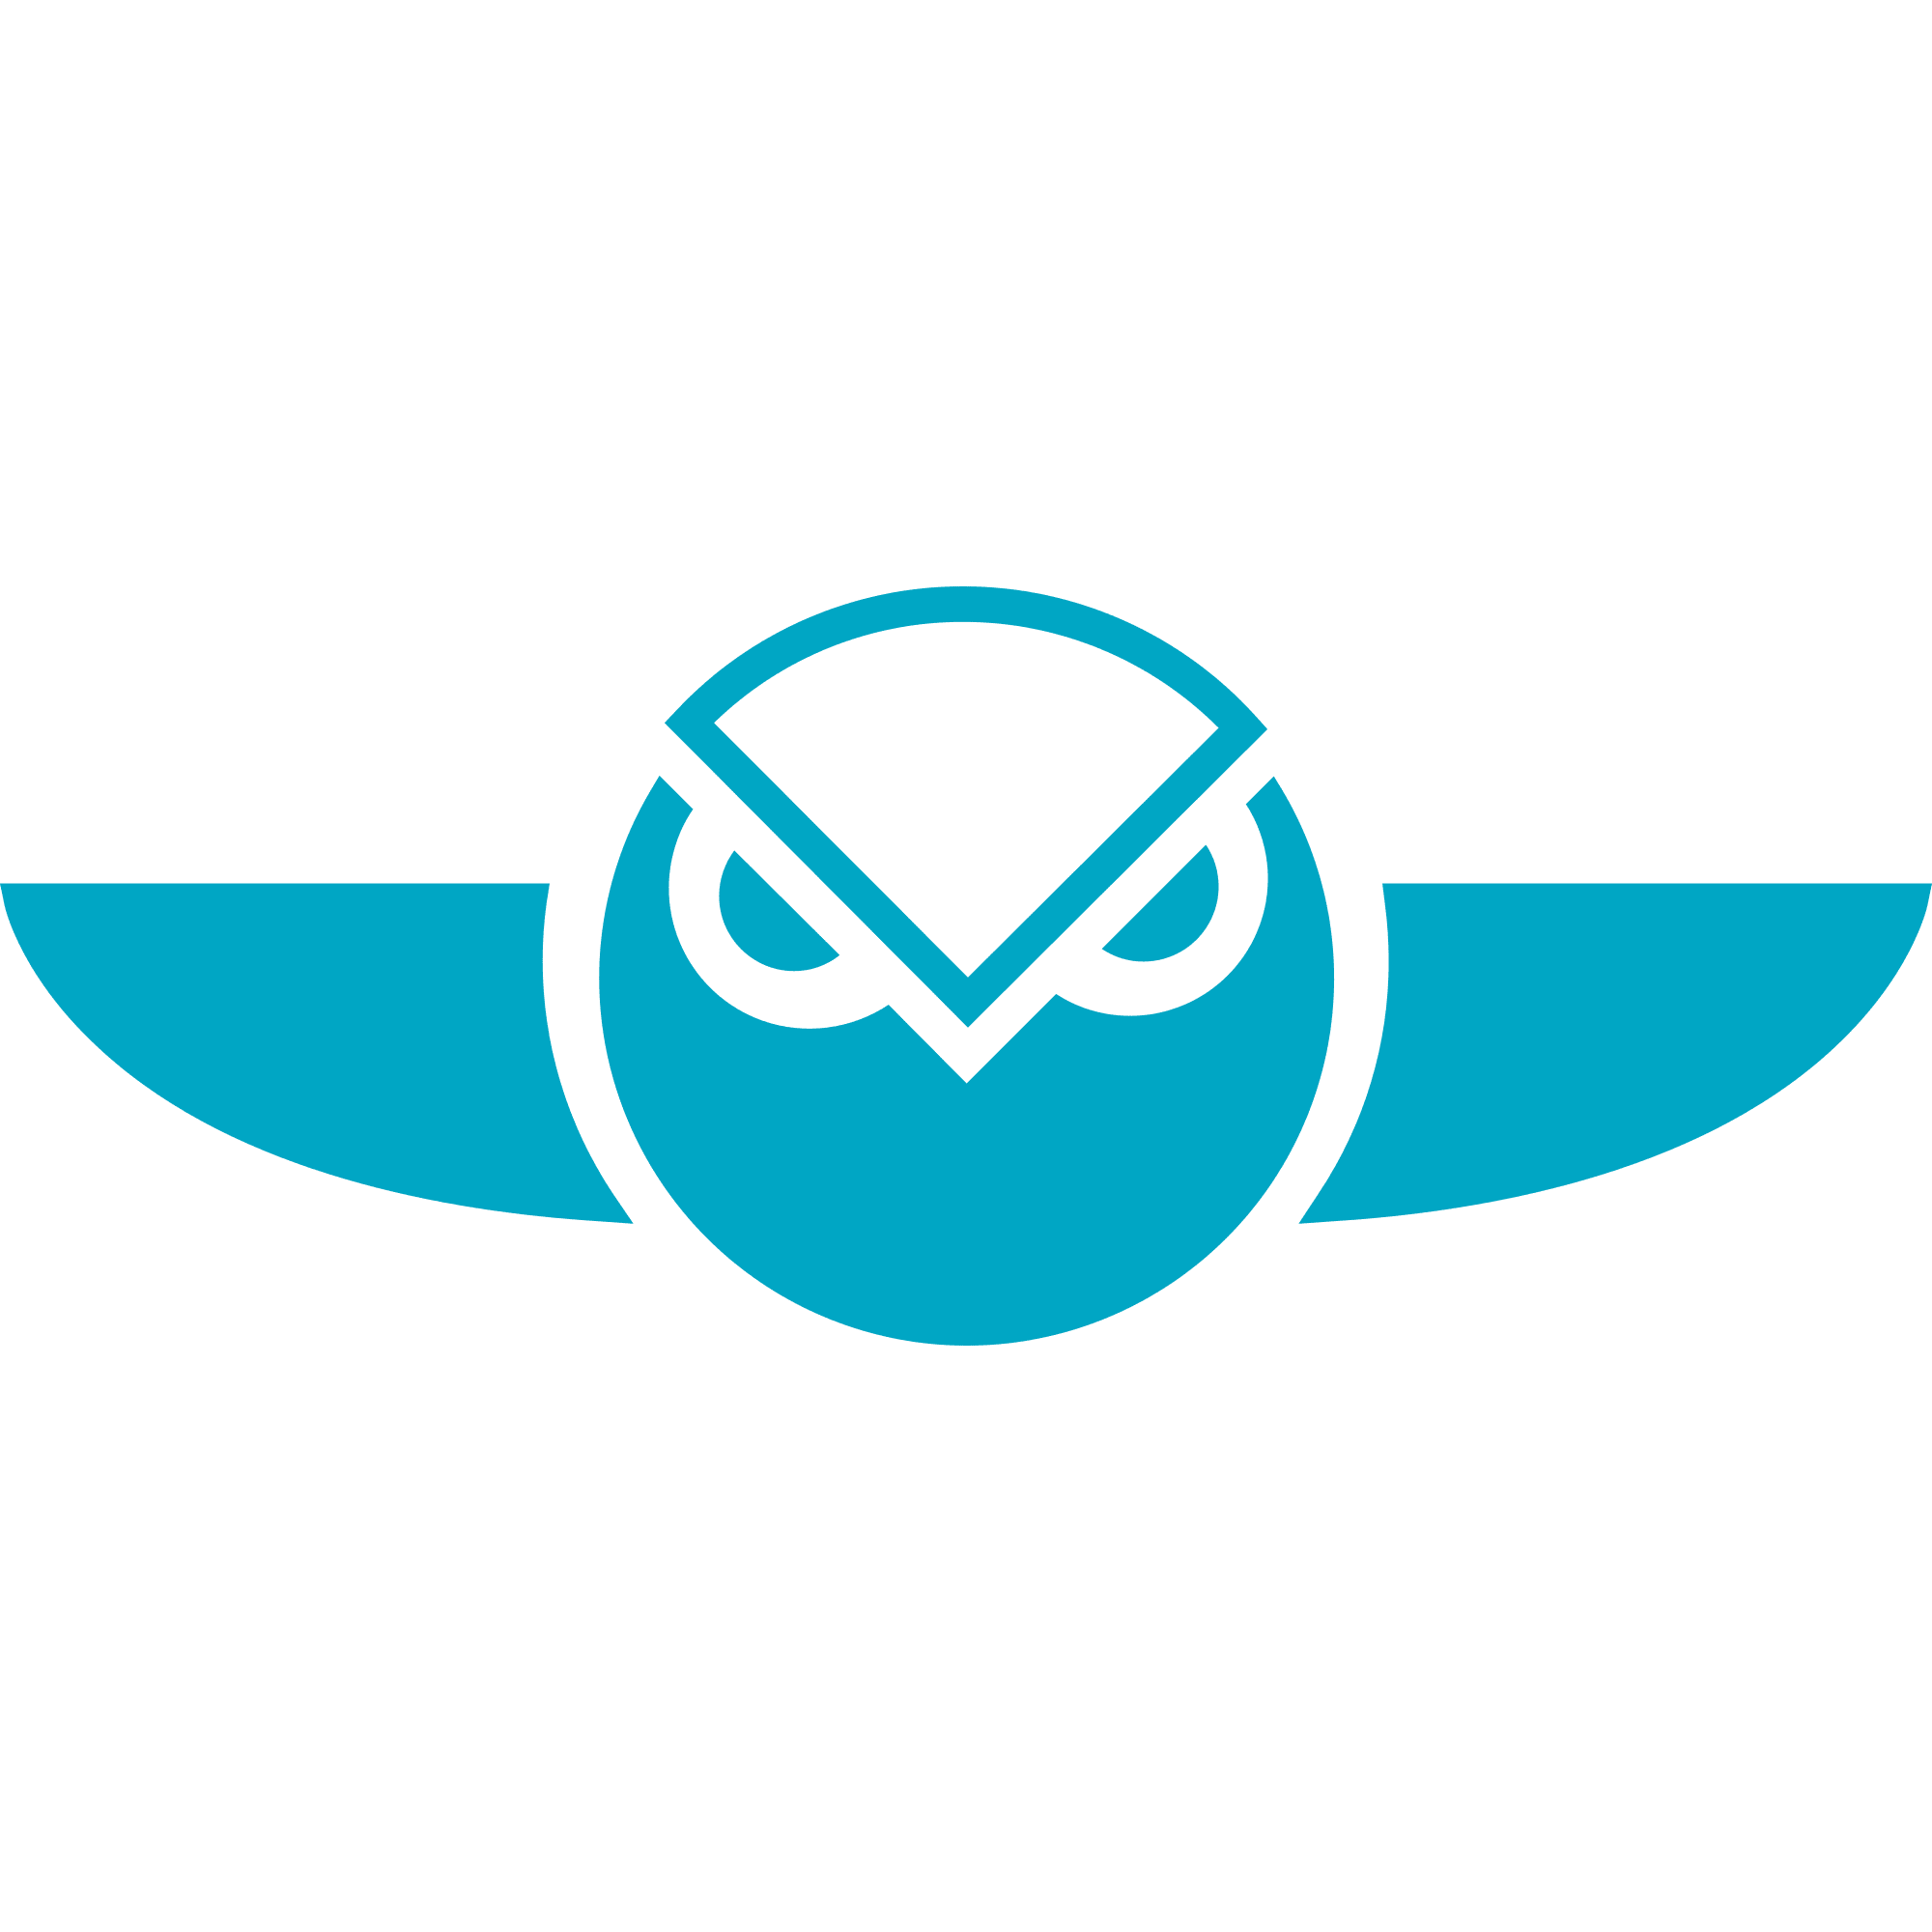 Gnosis logo in png format